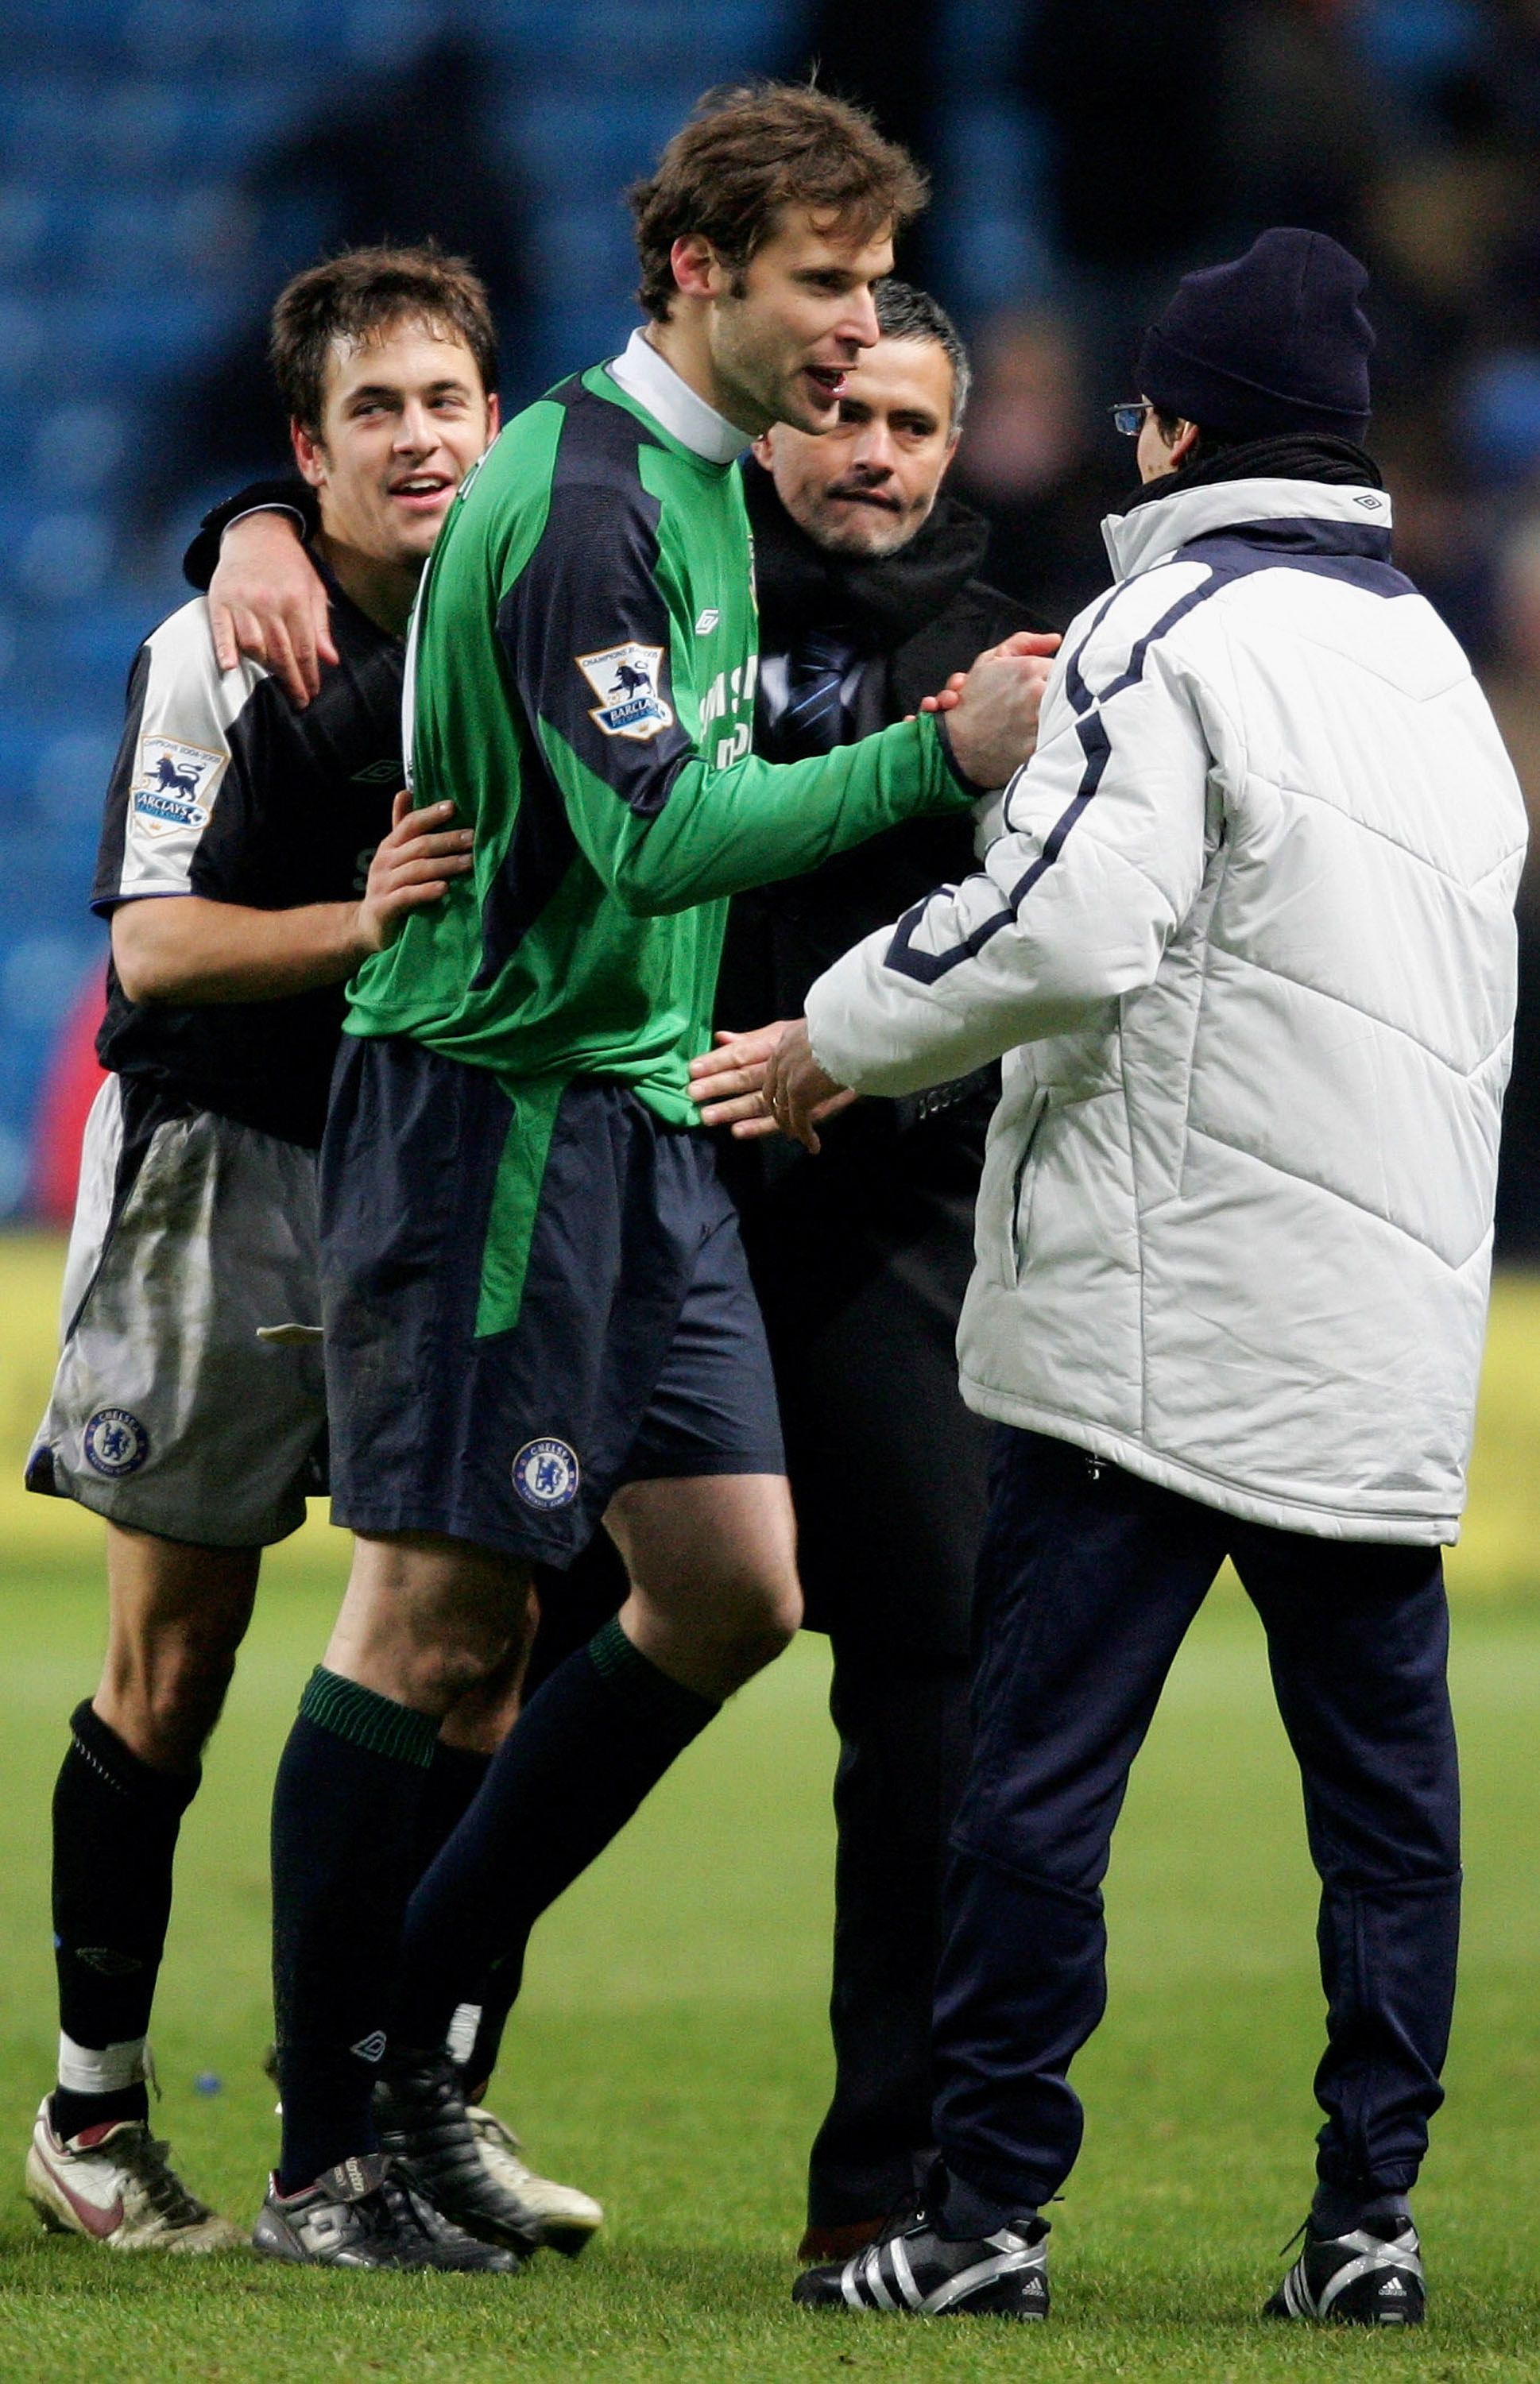 MANCHESTER, UNITED KINGDOM - DECEMBER 28: Joe Cole of Chelsea is congratulated by Jose Mourinho after the Barclays Premiership match between Manchester City and Chelsea at the City of Manchester Stadium on December 28, 2005 in Manchester, England. (Photo by Ross Kinnaird/Getty Images)